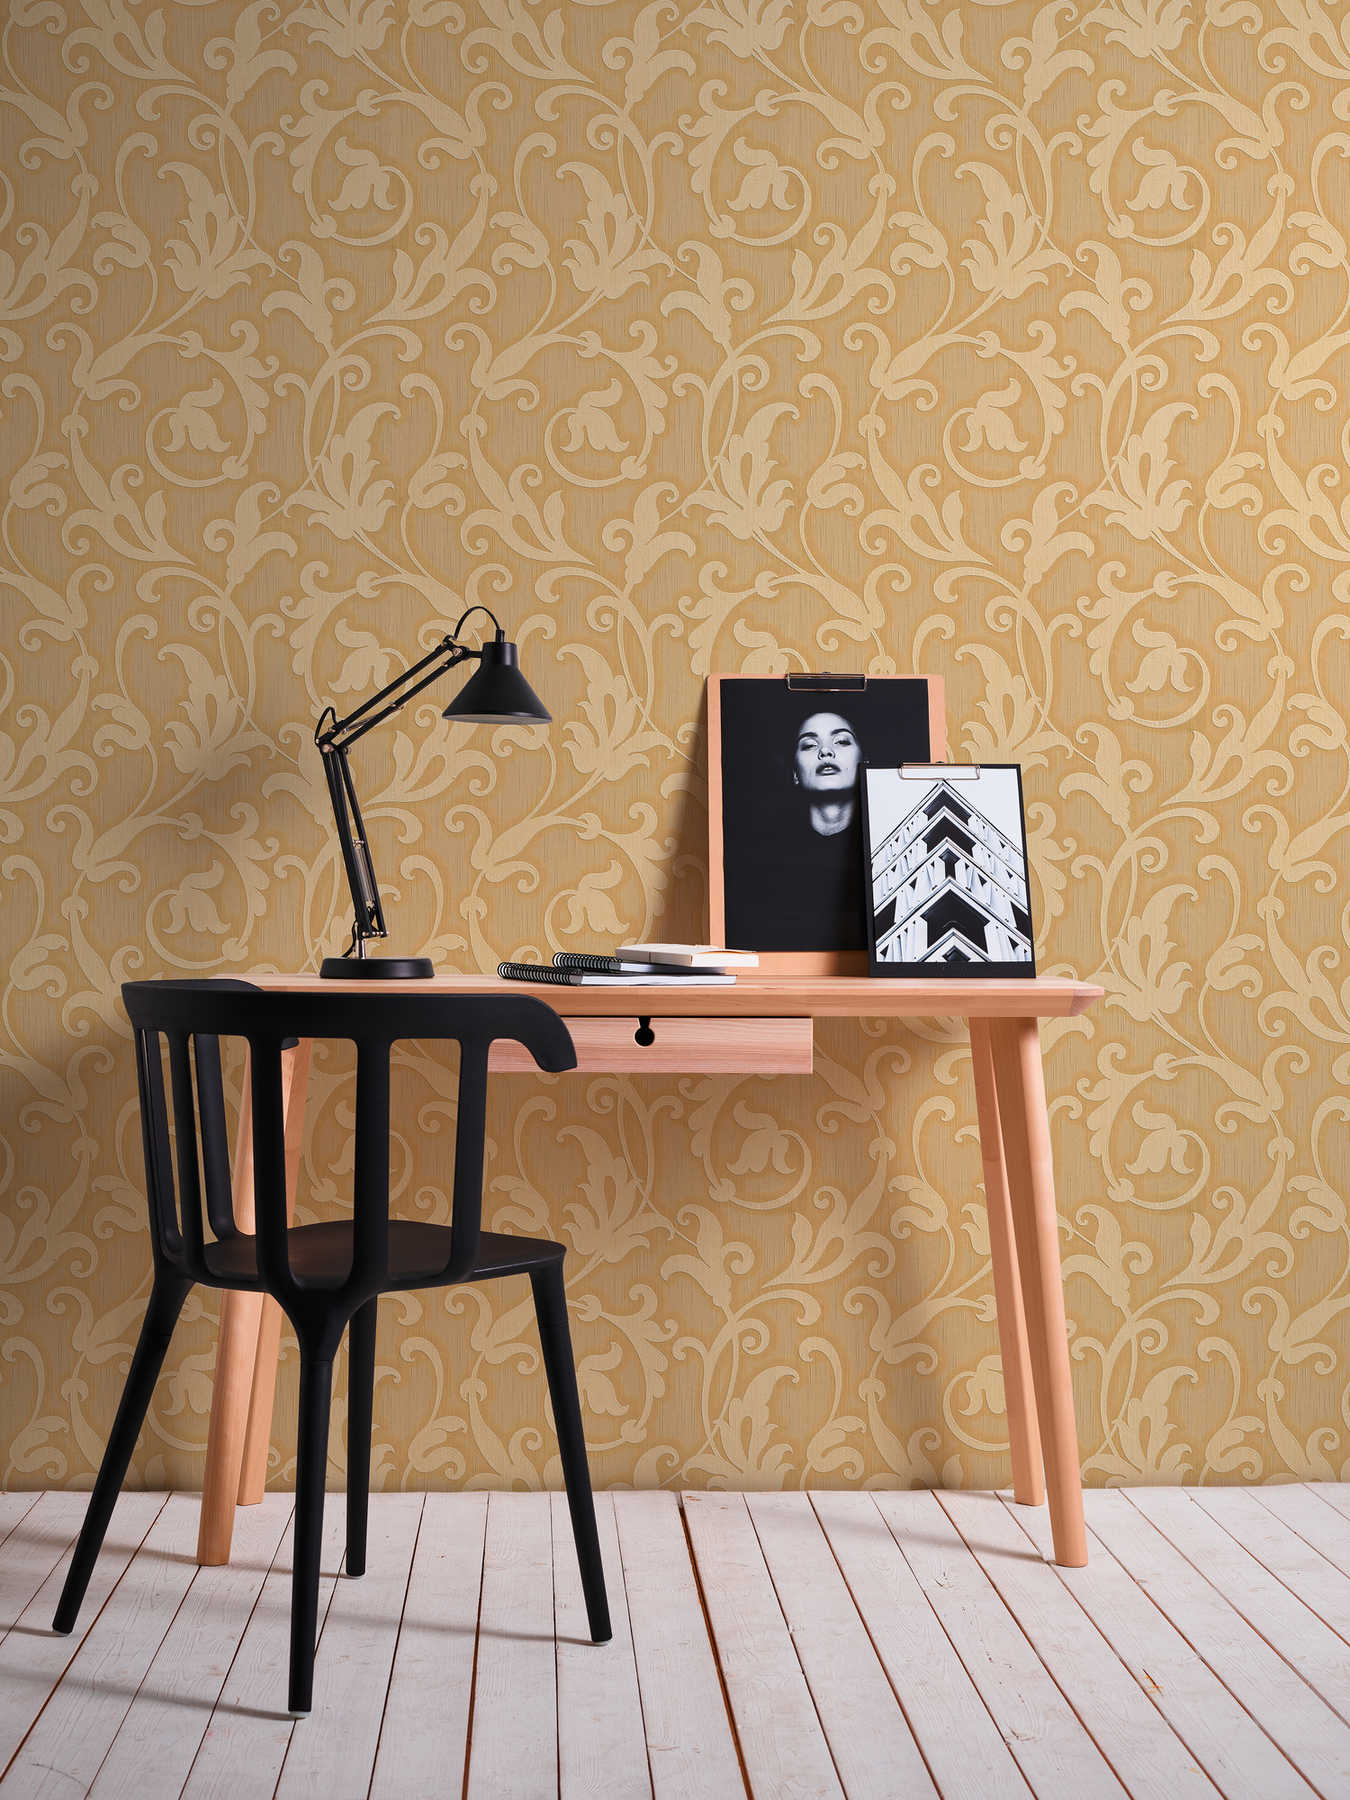             Ornament wallpaper with textile texture & embossed pattern - Yellow, Metallic
        